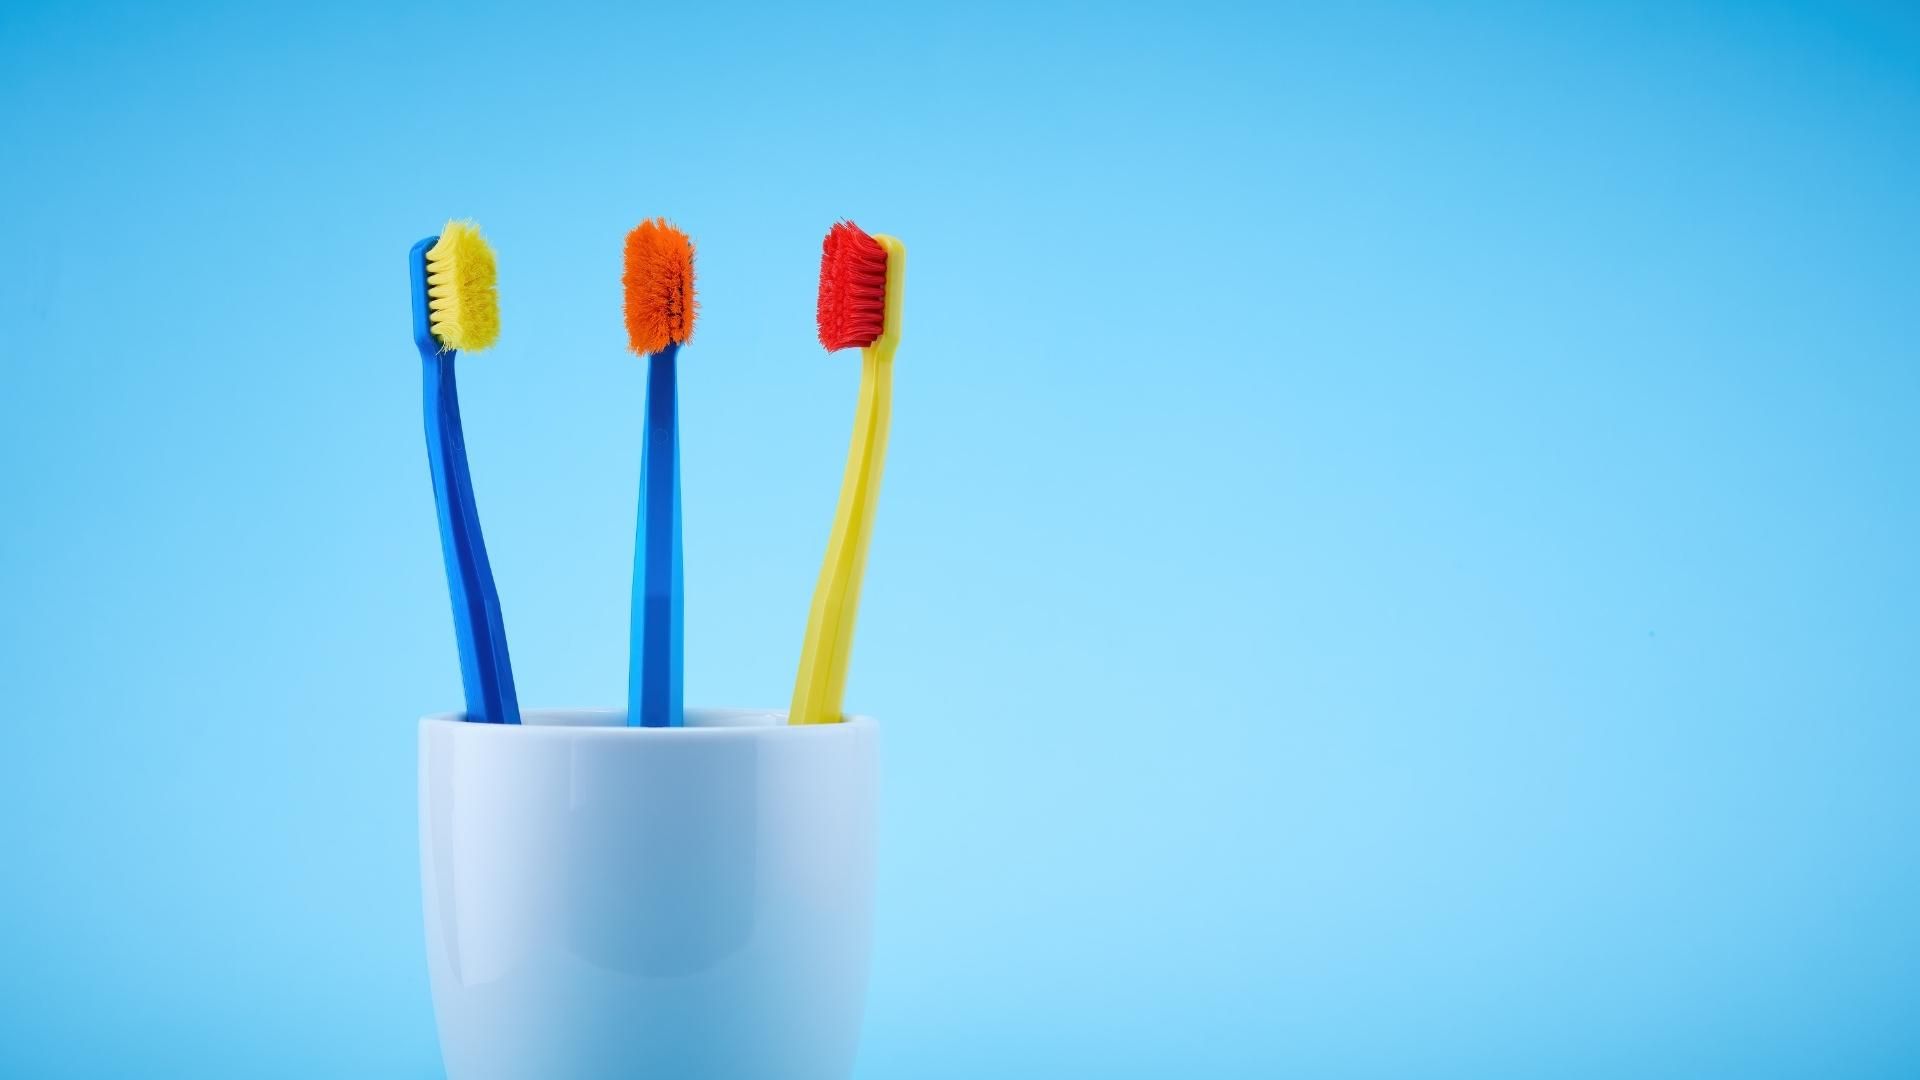 Don’t forget your toothbrush holder: the TA10 form explained